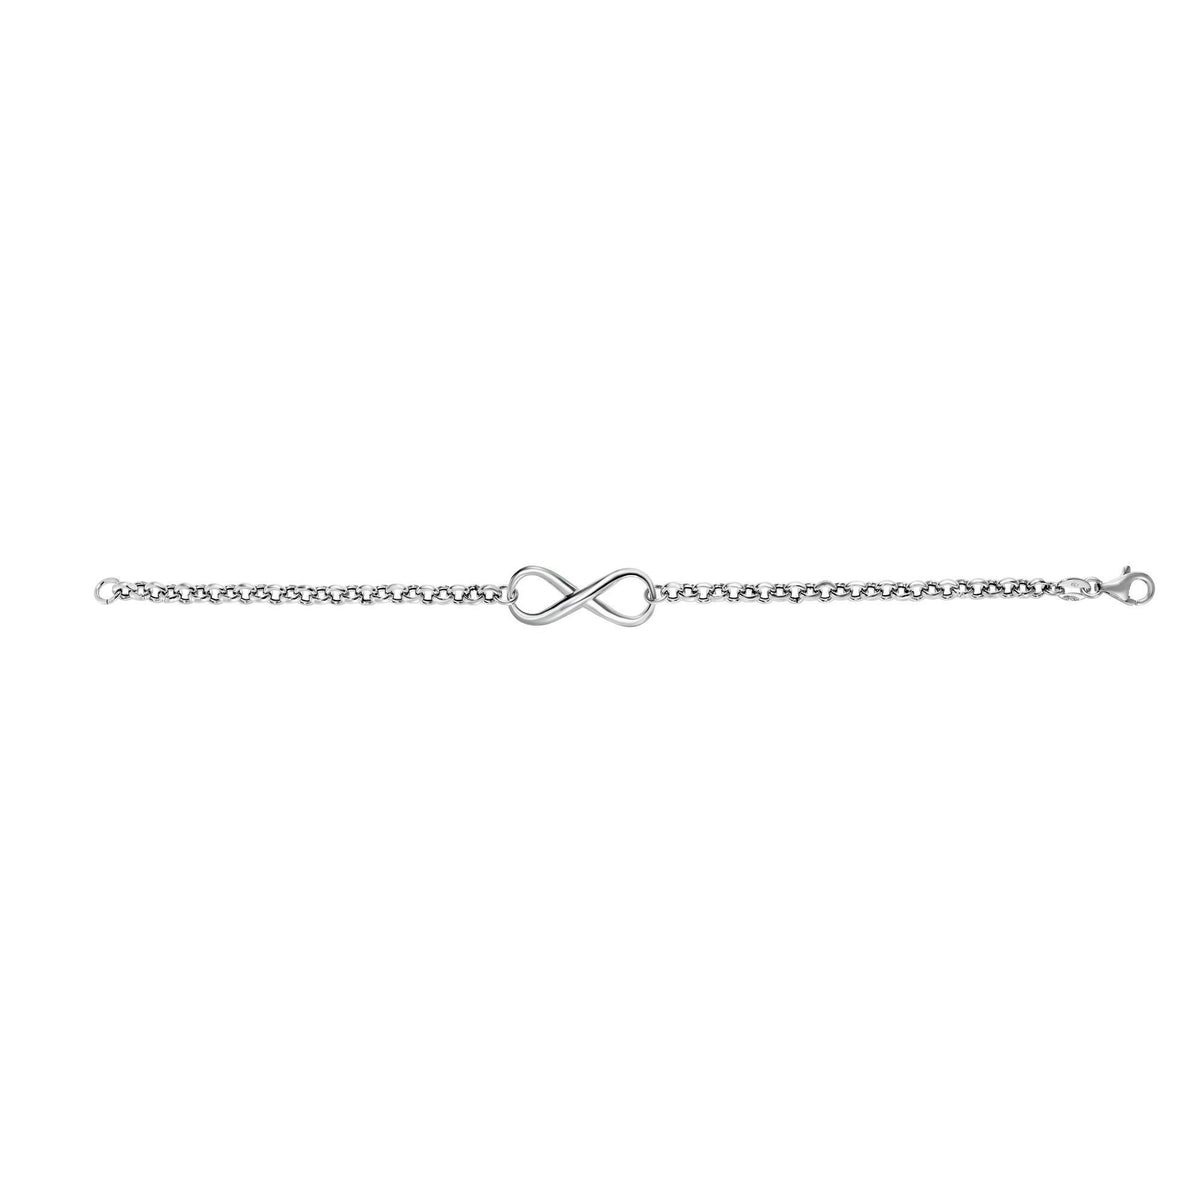 Sterling Silver Link Chain And Infinity Charm Women's Bracelet, 7.25" fine designer jewelry for men and women